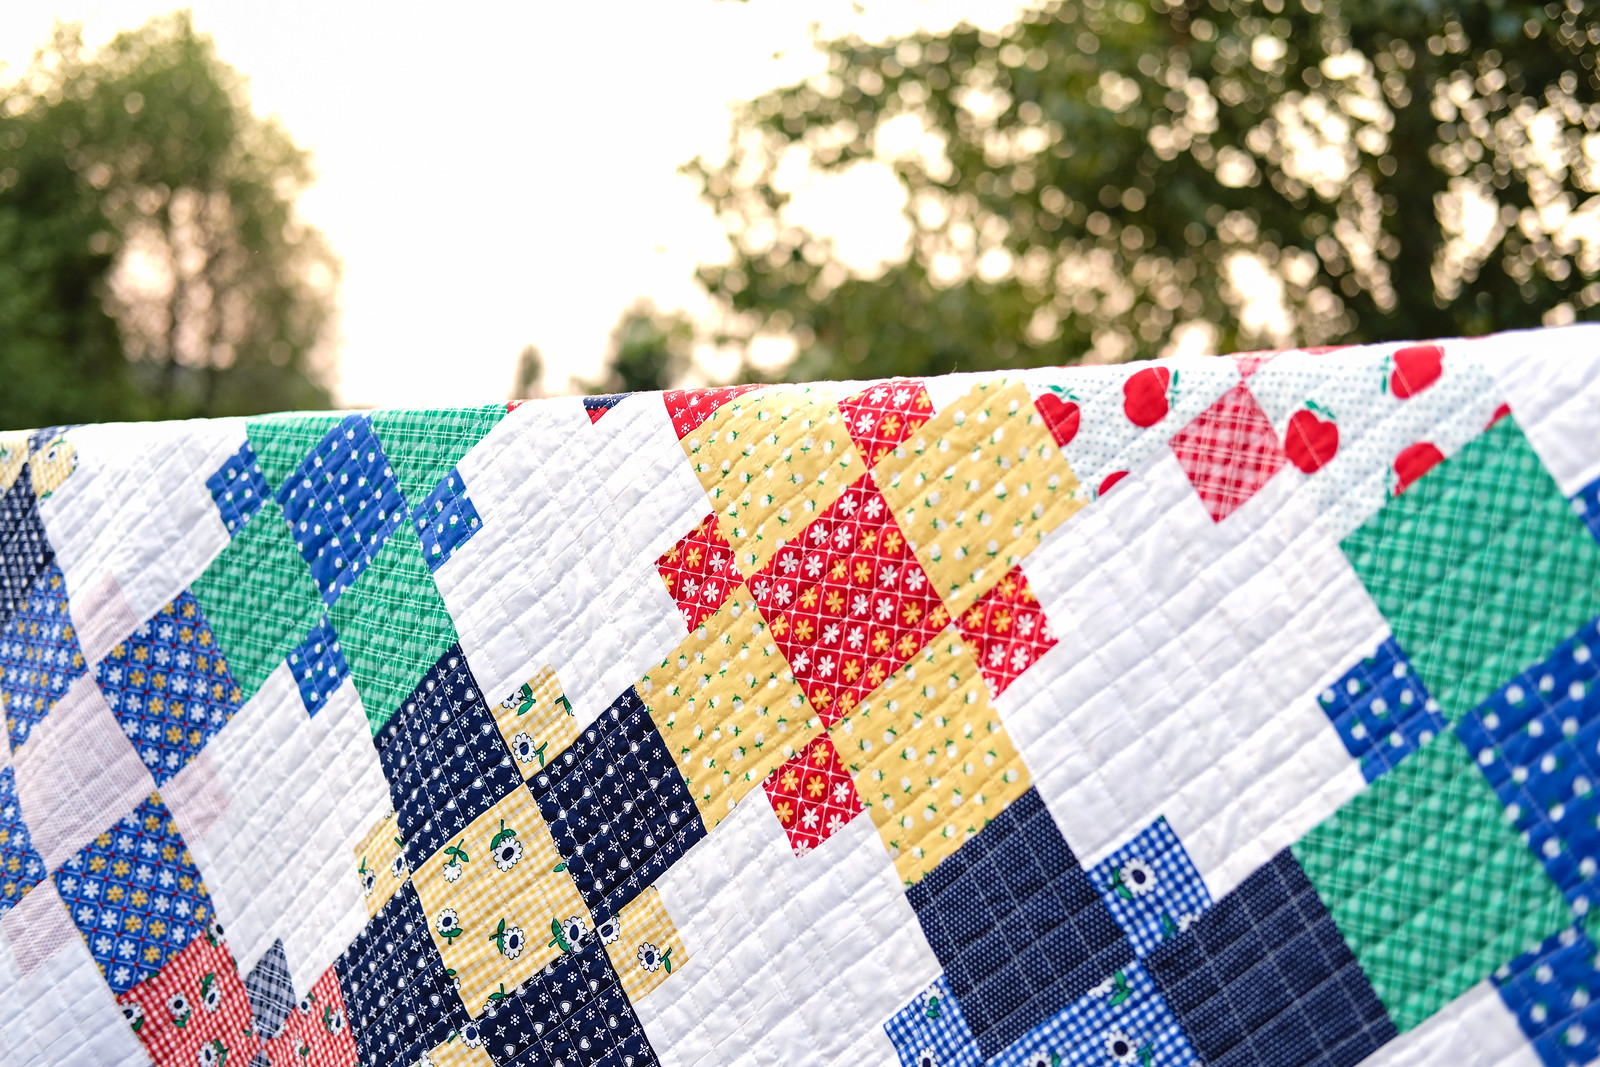 Sunnyside Ave Even-Steven Quilt - Kitchen Table Quilting